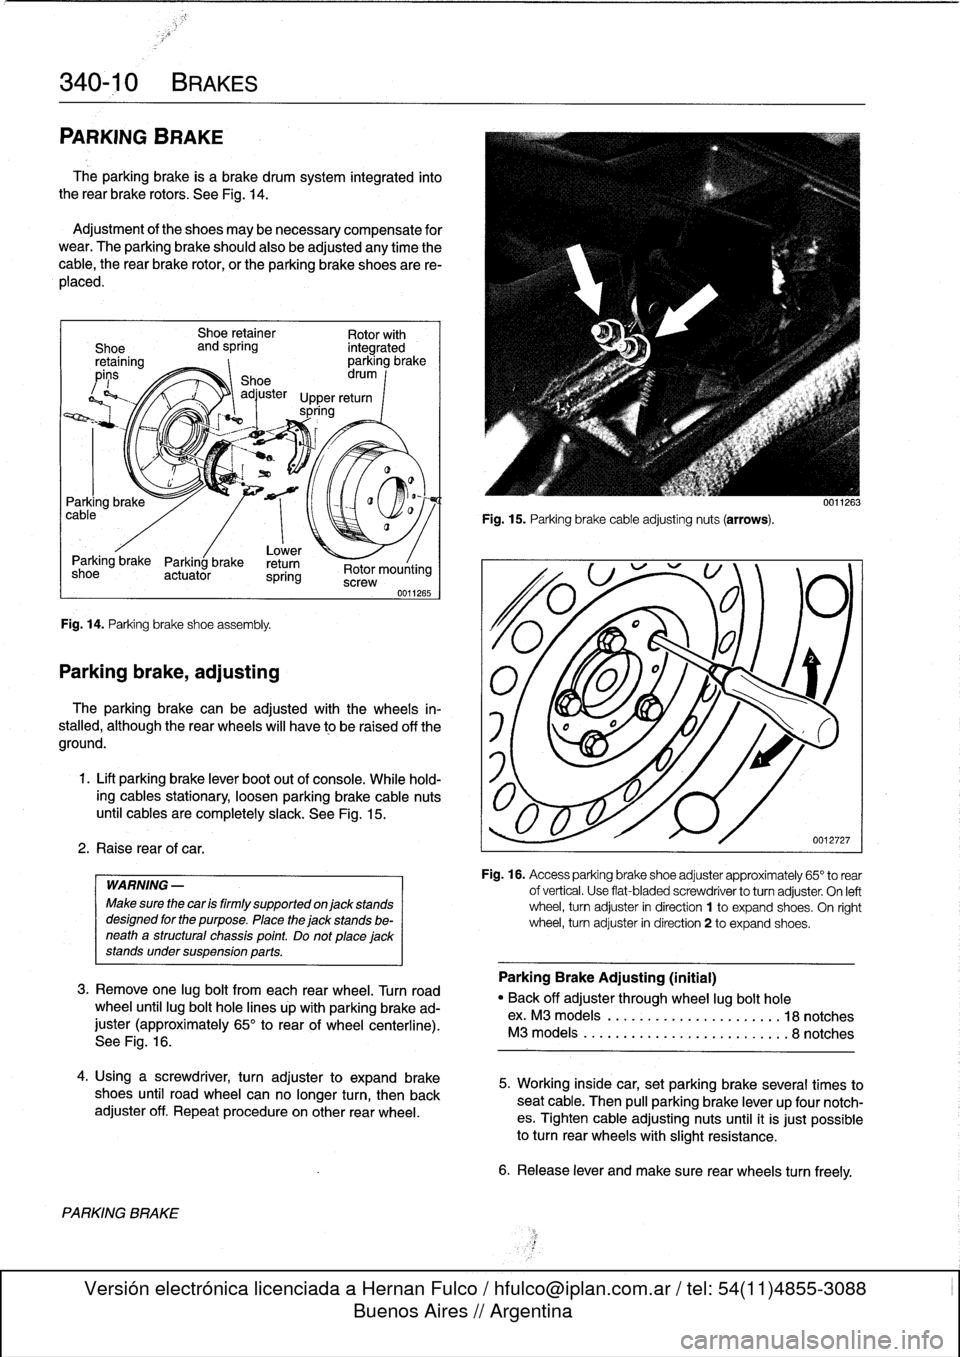 BMW 328i 1995 E36 Workshop Manual 
340-
1
0
BRAKES

PARKING
BRAKE

The
parking
brake
is
a
brake
drum
system
integrated
into
the
rear
brake
rotors
.
See
Fig
.
14
.

Adjustment
of
the
shoes
may
benecessary
compensate
for
wear
.
The
park